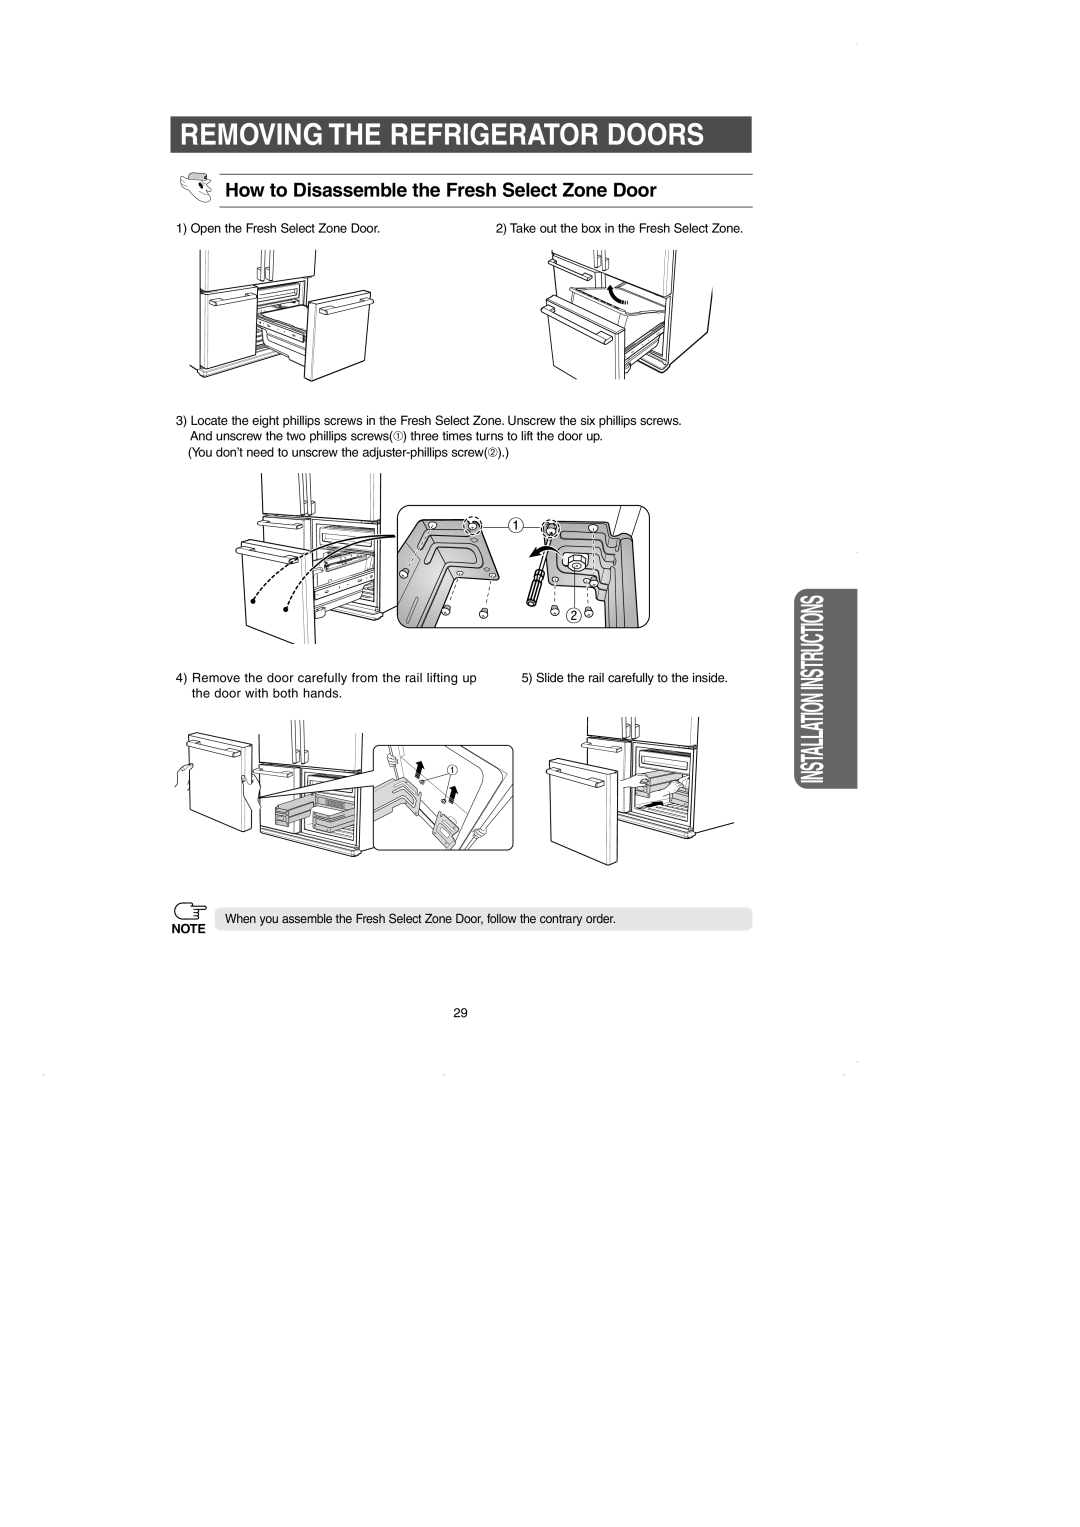 GE RM25 How to Disassemble the Fresh Select Zone Door, Removing The Refrigerator Doors, Installation Instructions 